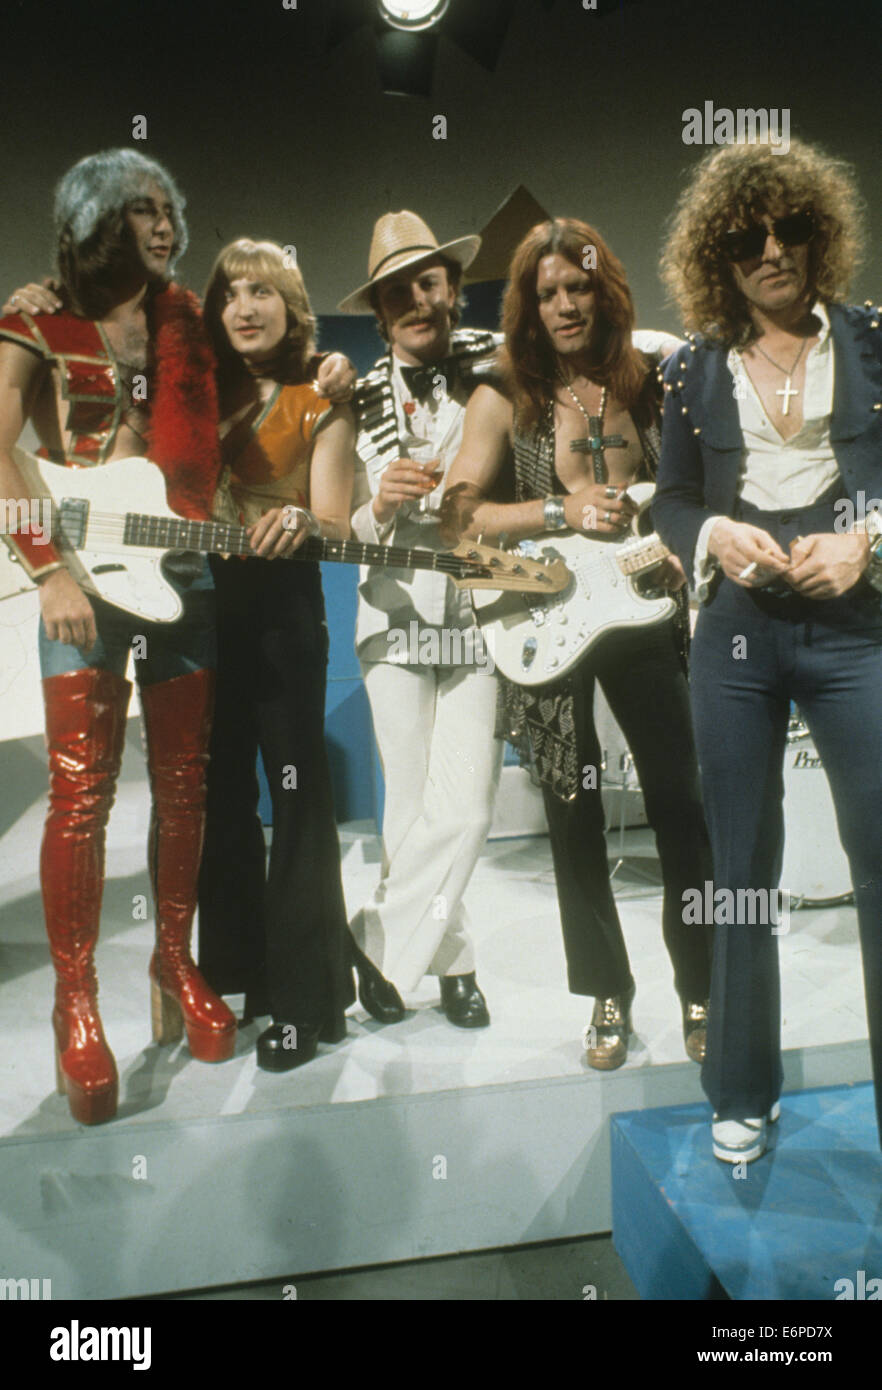 MOTT THE HOOPLE  UK glam-rock group about 1973 Stock Photo